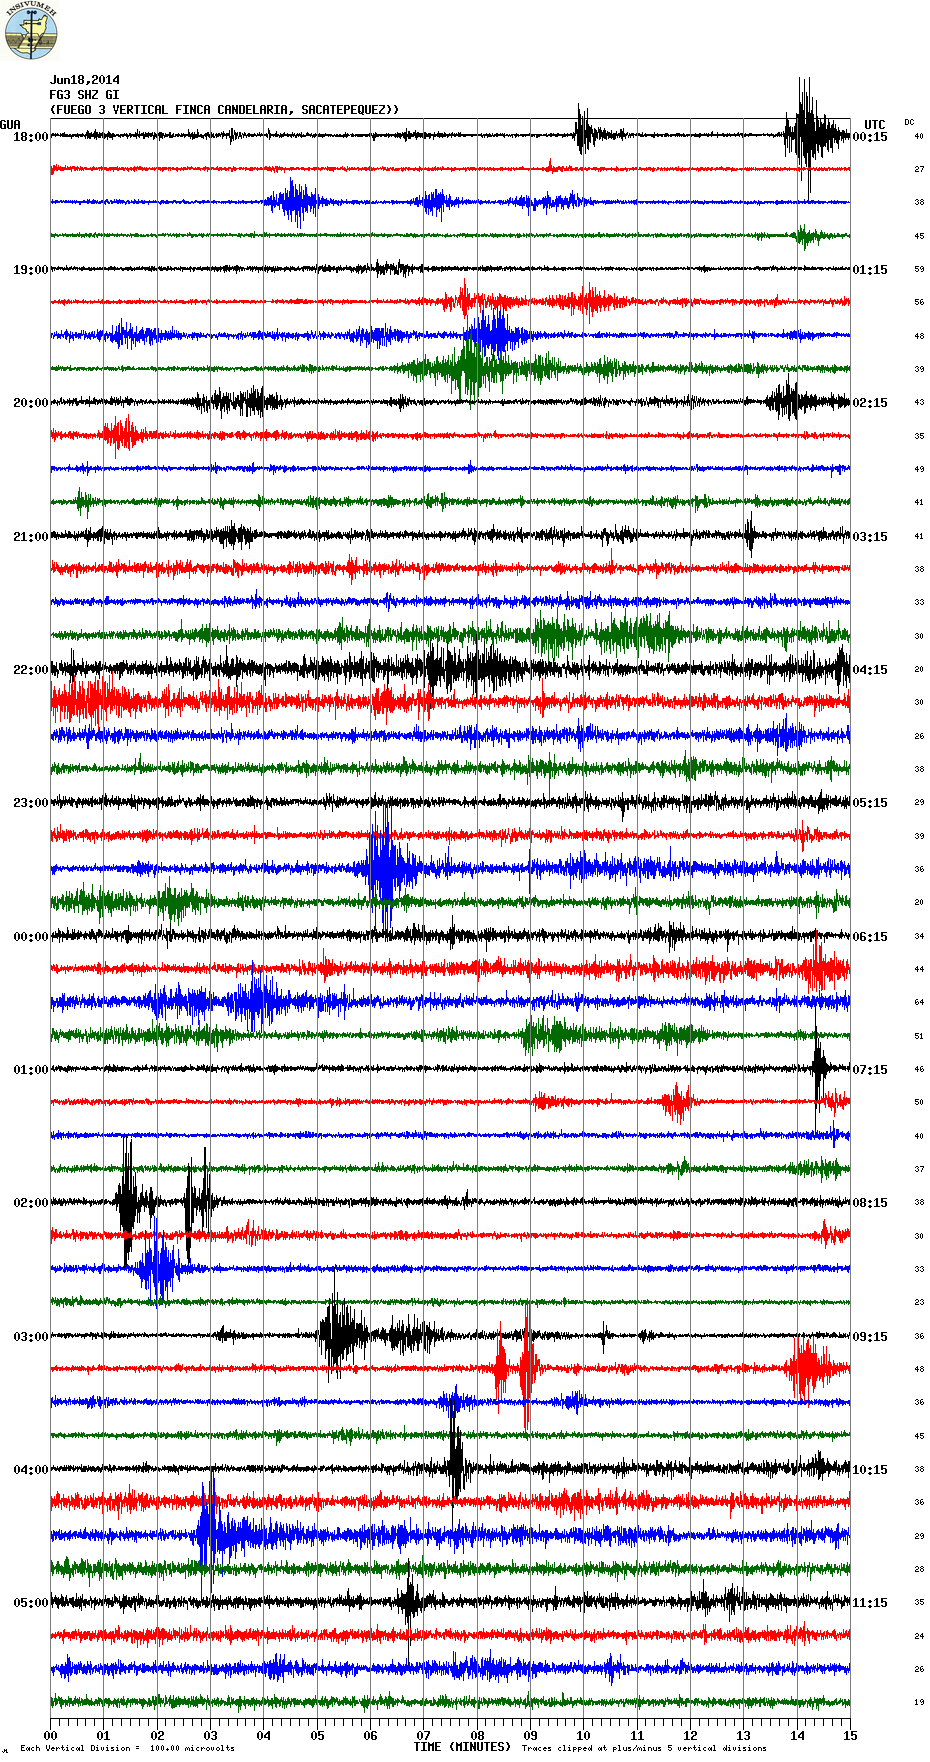 This morning's seismic signal from Fuego volcano (FG3 station, INSIVUMEH)